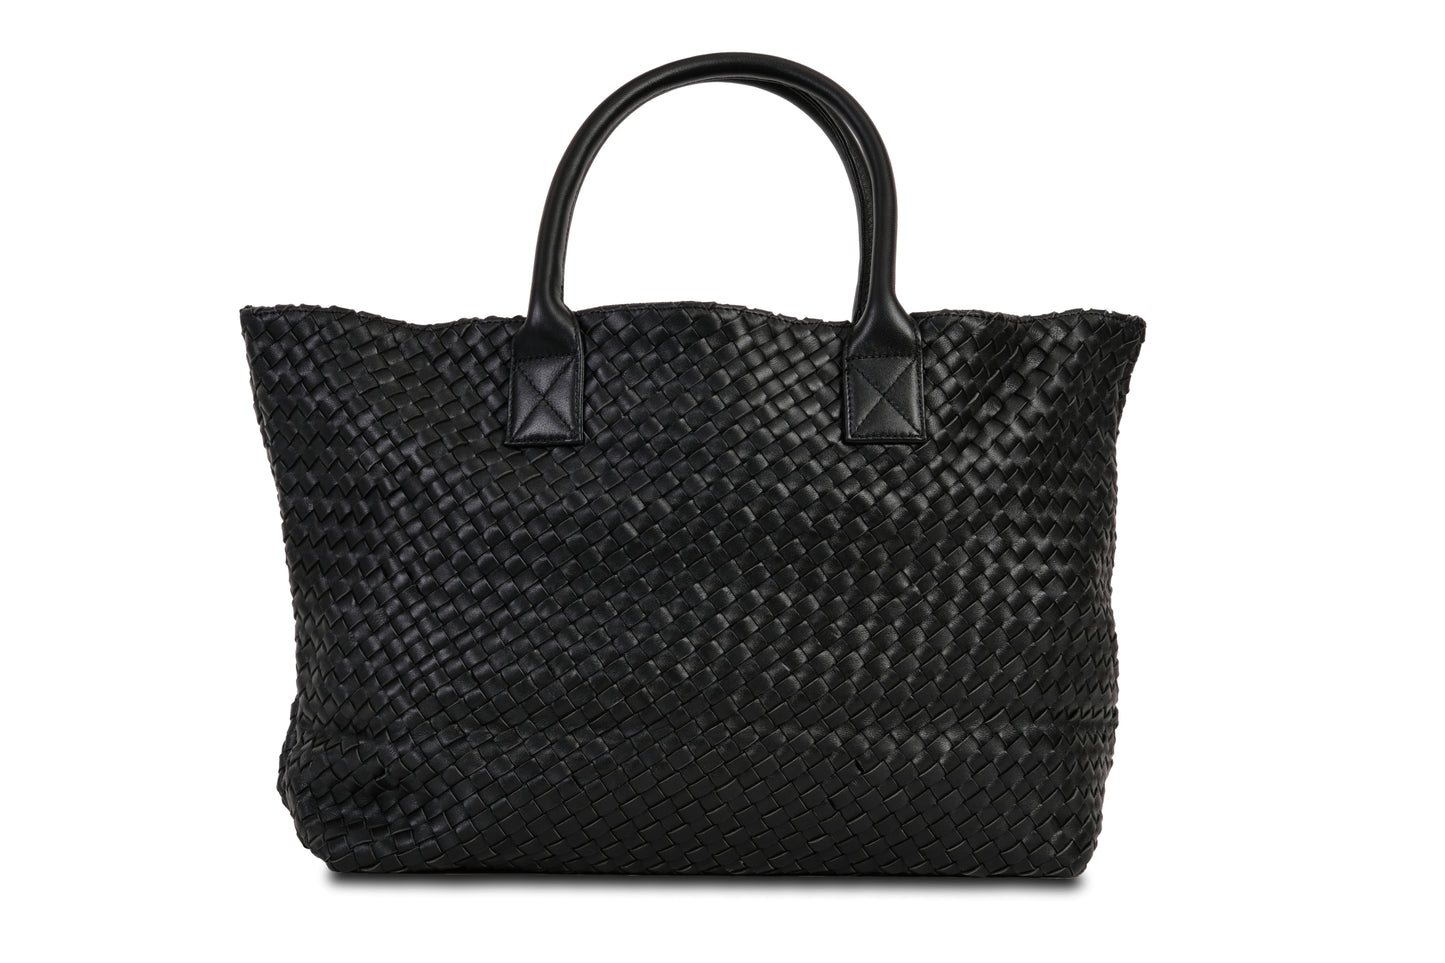 Destarina Midnight Black Crosshatch Leather Tote Bag Handbag made by Dewi Maya back view available at the best boutique in Upstate South Carolina Spartanburg Greenville Dewi Maya Boutique